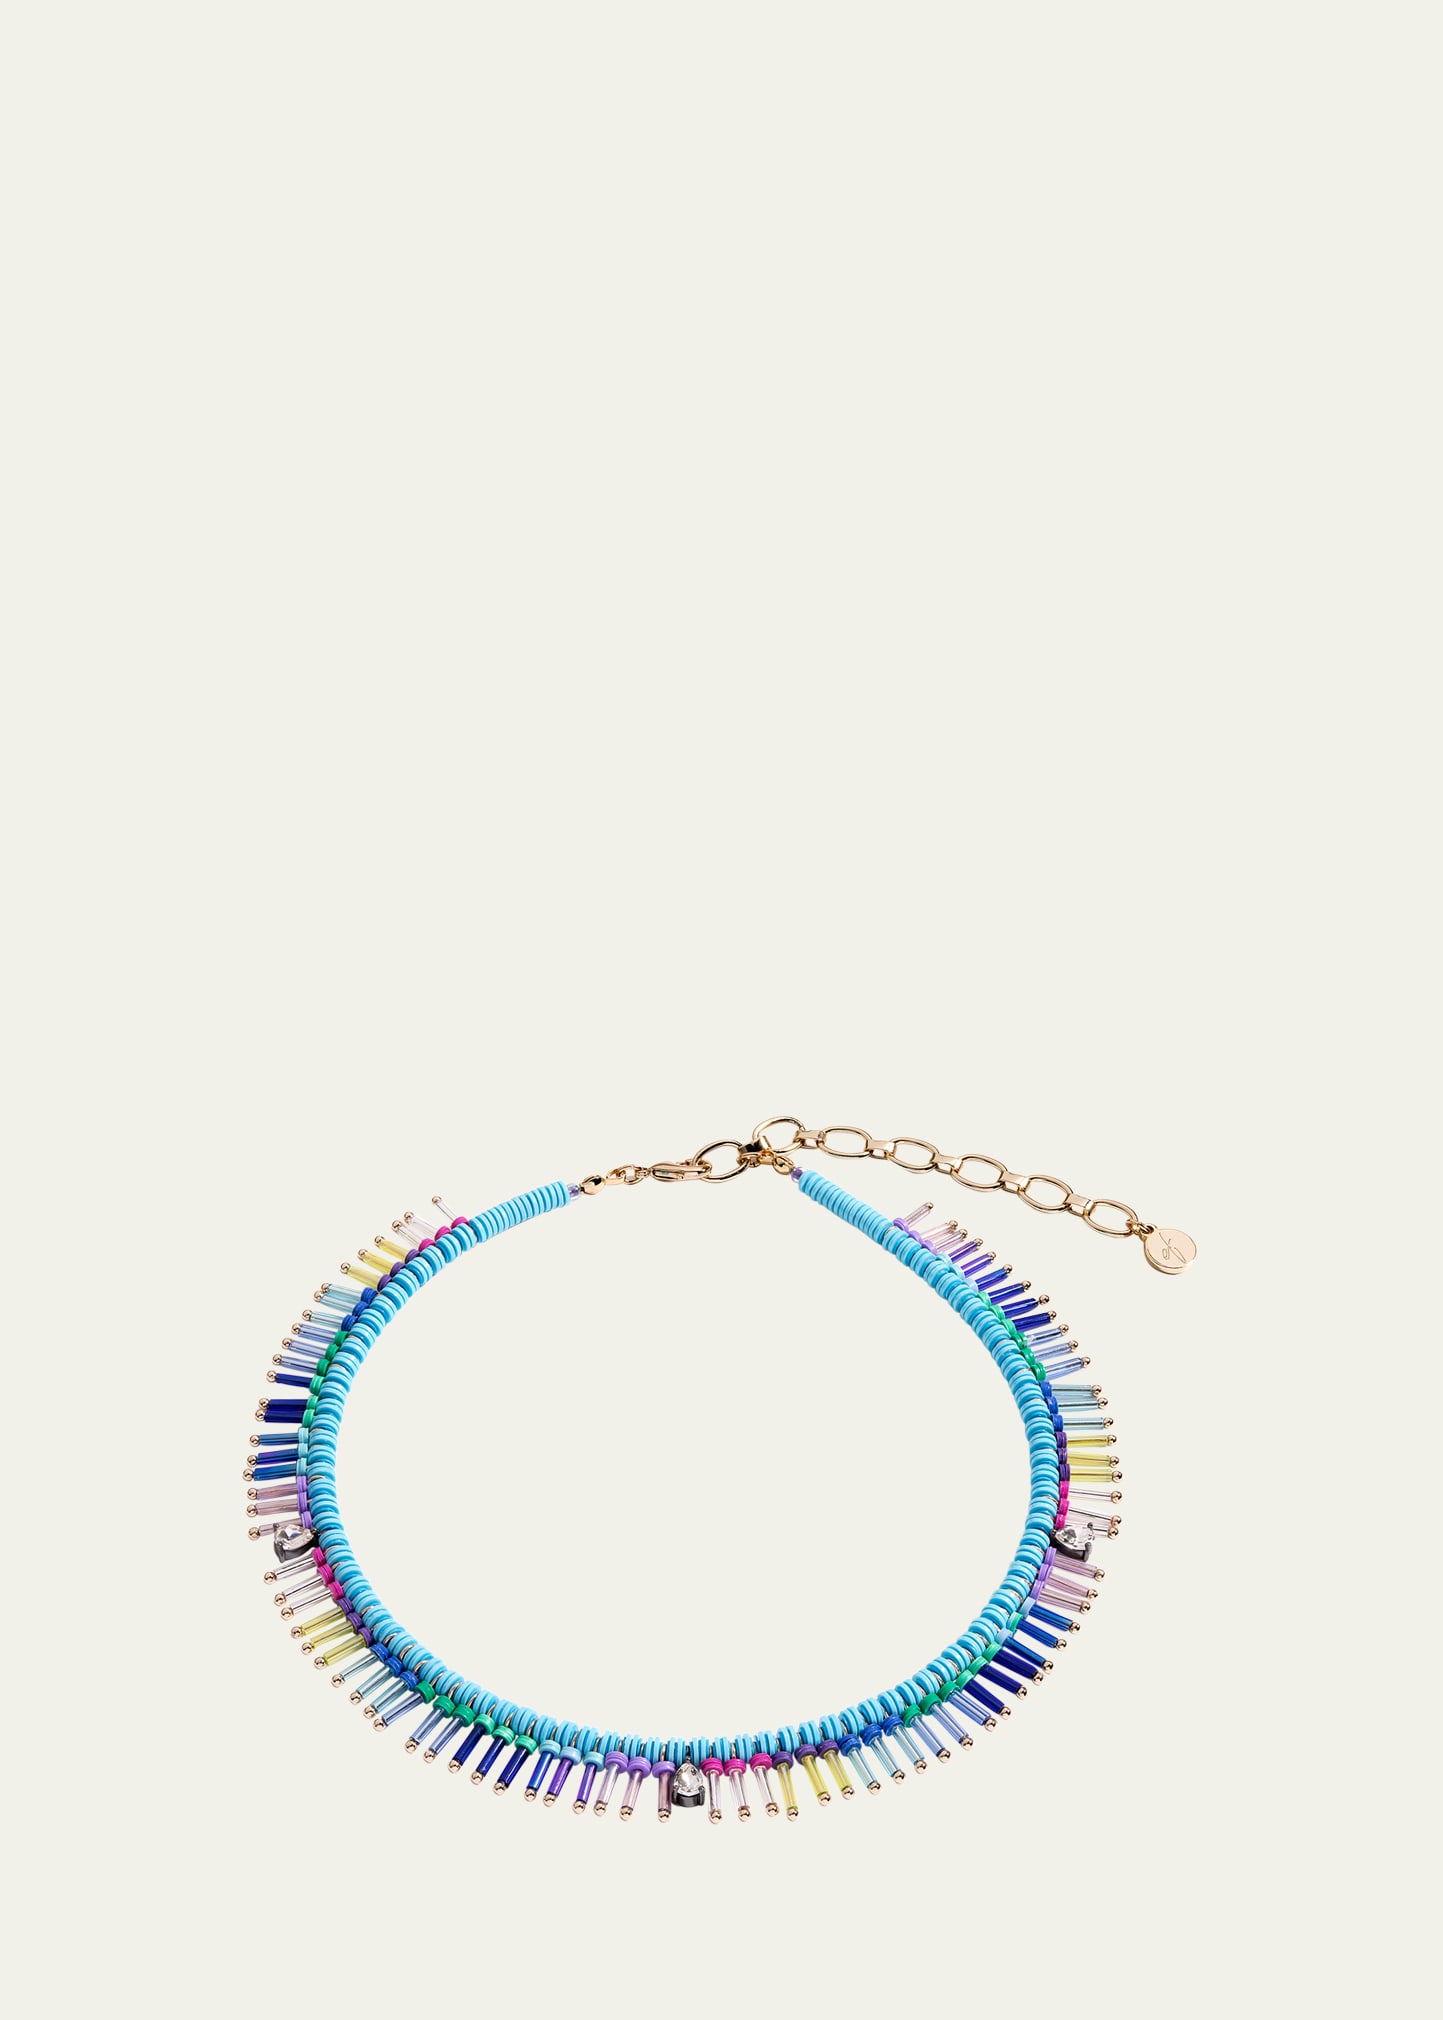 On The Fringe Necklace with Bugle Beads and Crystals